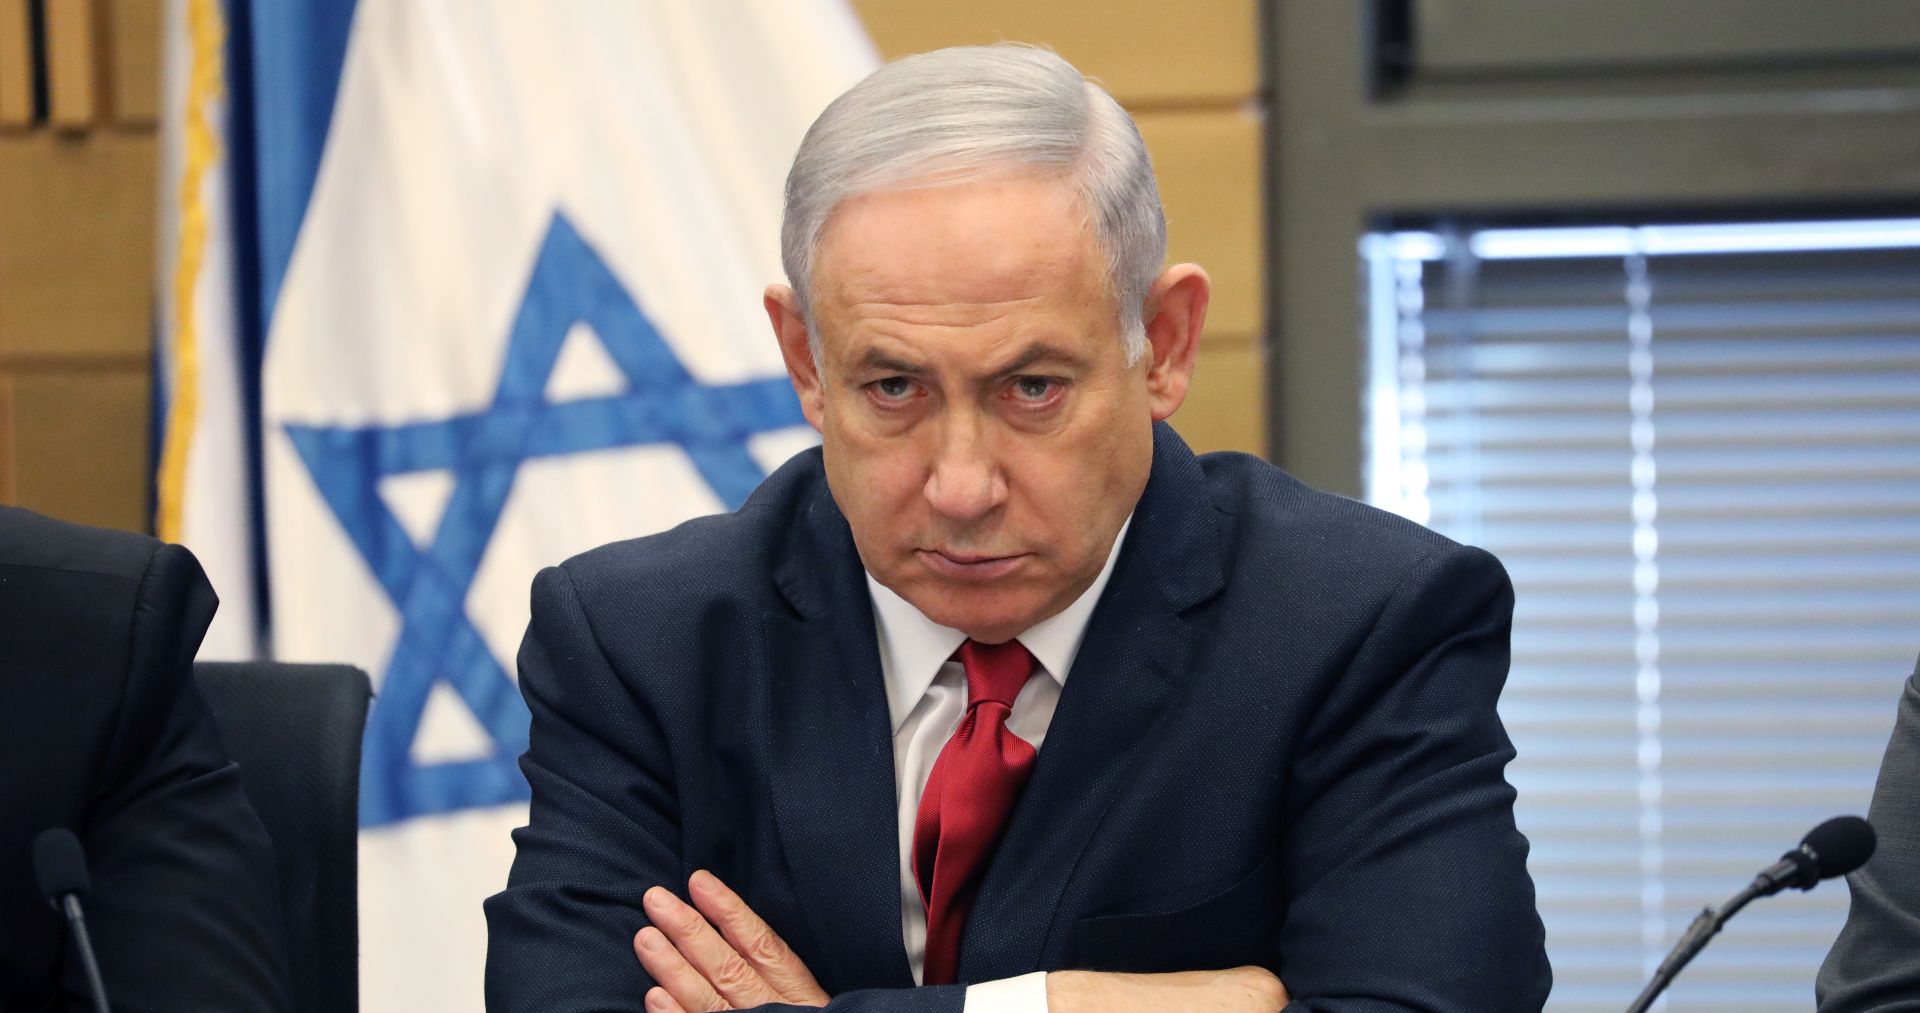 epa08014909 (FILE) - Israeli Prime Minister and leader of Likud Party Benjamin Netanyahu during an extended faction meeting of the right-wing bloc members at the Israeli Knesset (parliament) in Jerusalem, Israel, 18 November 2019 (reissued 21 November 2019). Reports on 21 November 2019 state Israeli Prime Minister Benjamin Netanyahu has officially been charged by the attorney general in a number of corruption scandals. Netanyahu was charged with bribery, breach of trust and fraud.  EPA/ABIR SULTAN